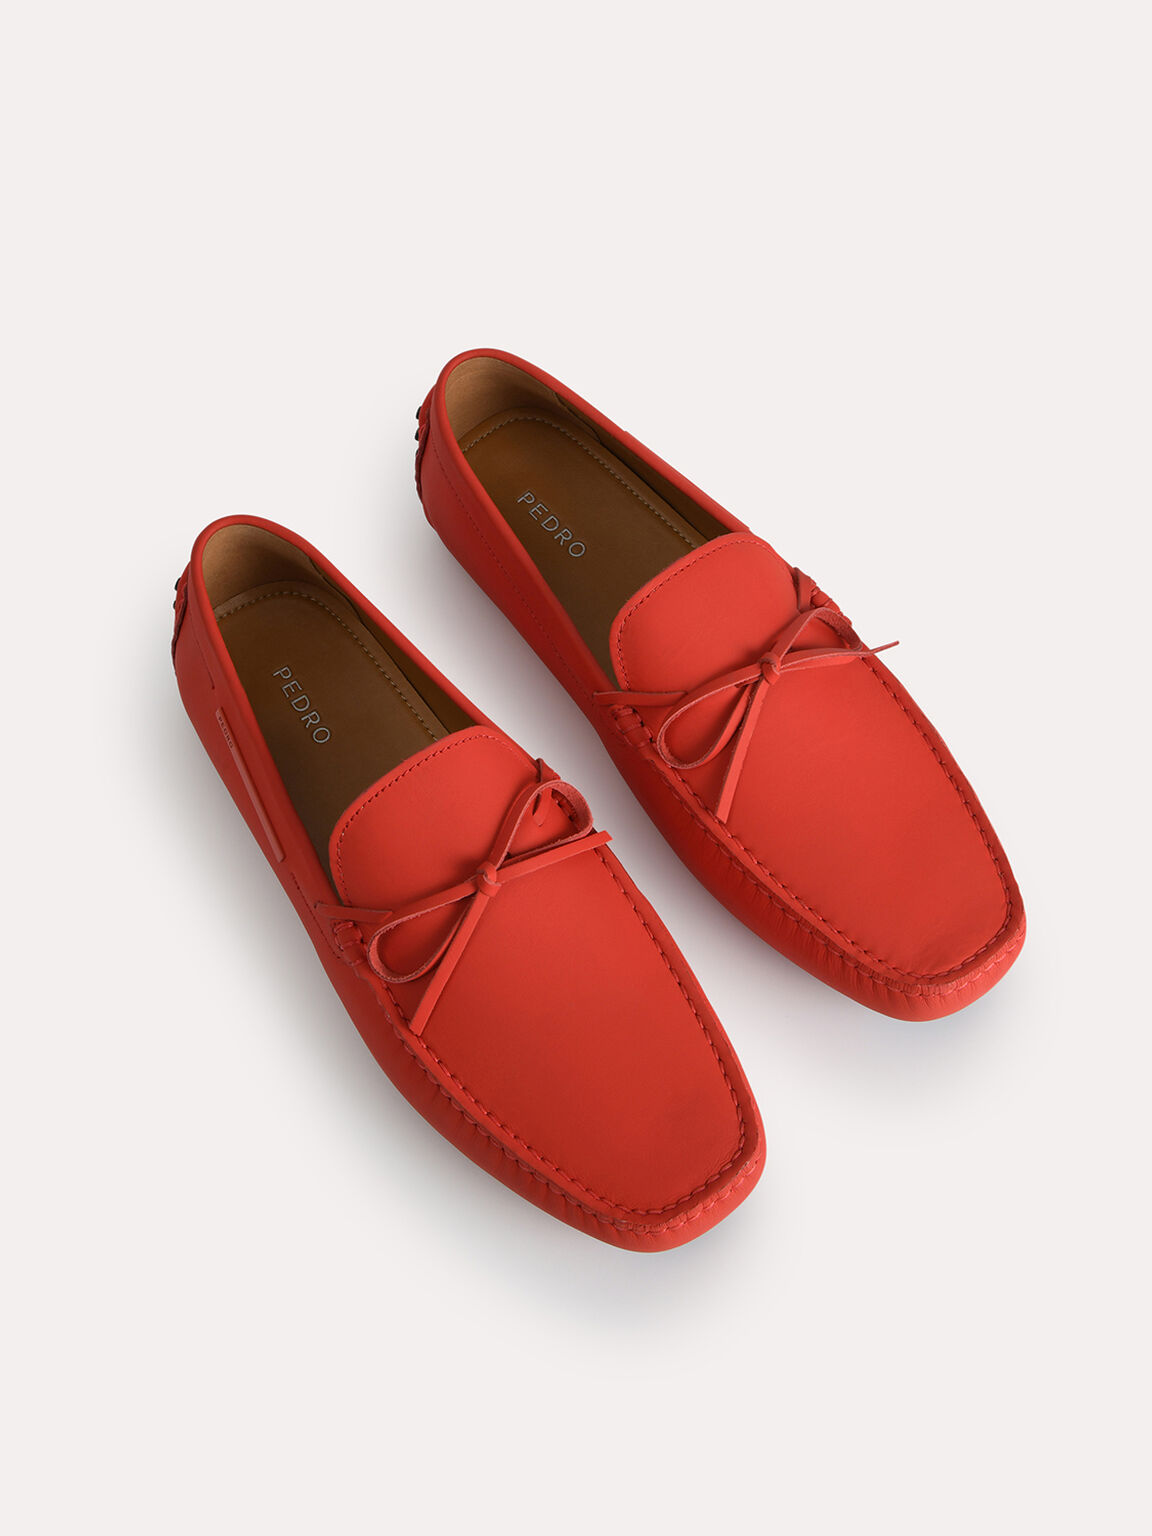 Leather Moccasins with Bow Detailing, Red